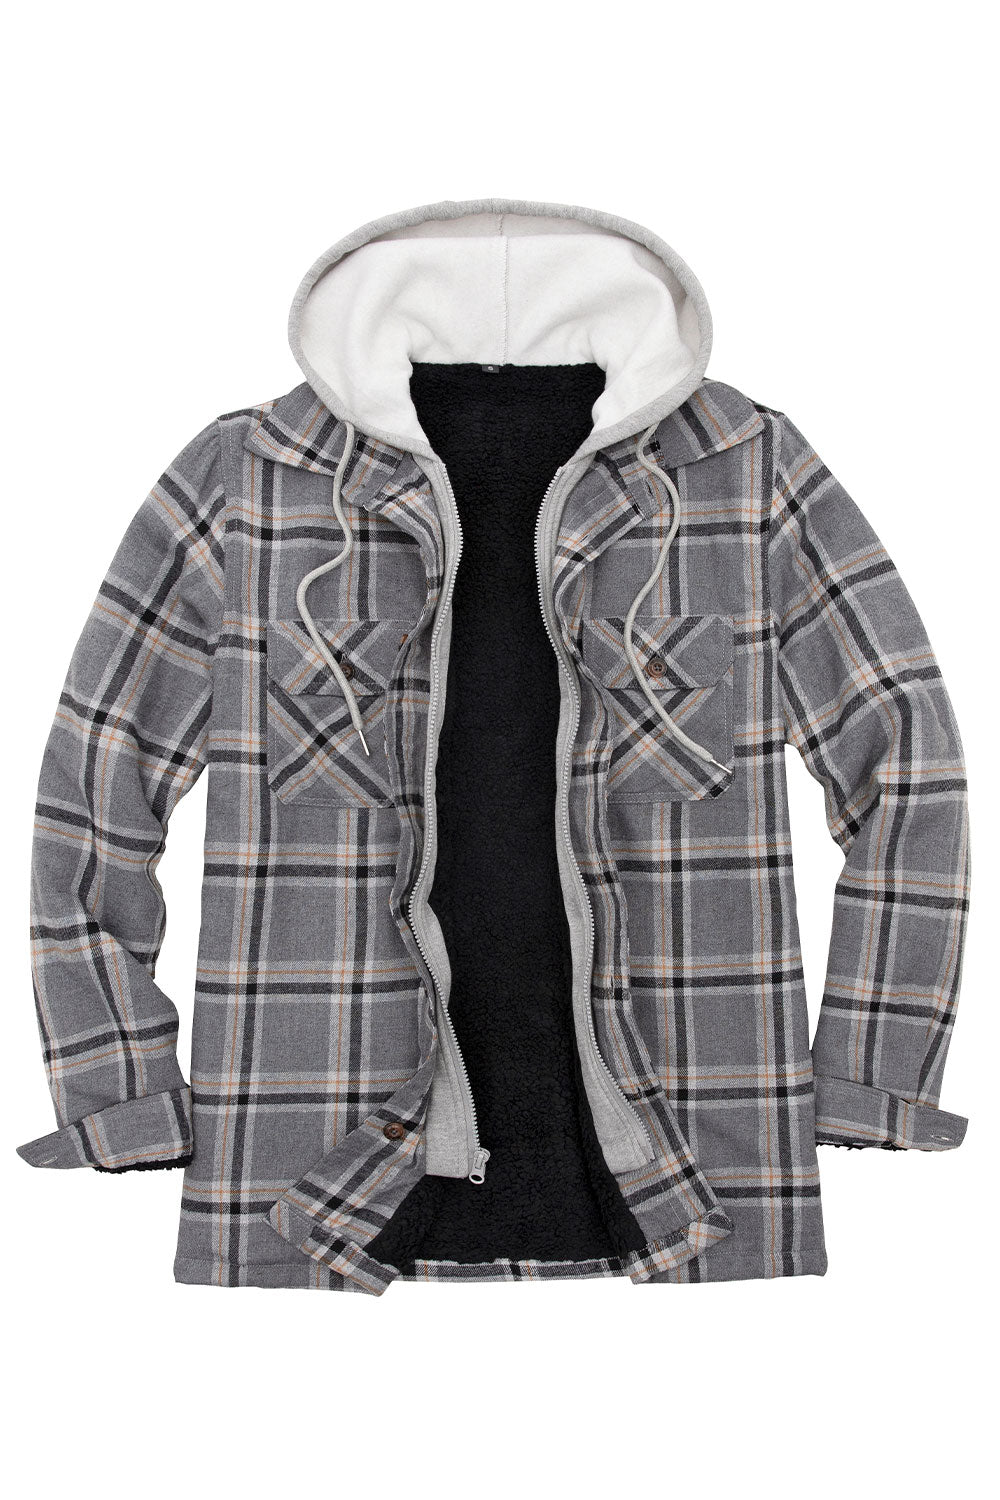 Matching Family Outfits - Men's Fuzzy Black White Flannel Jacket ...